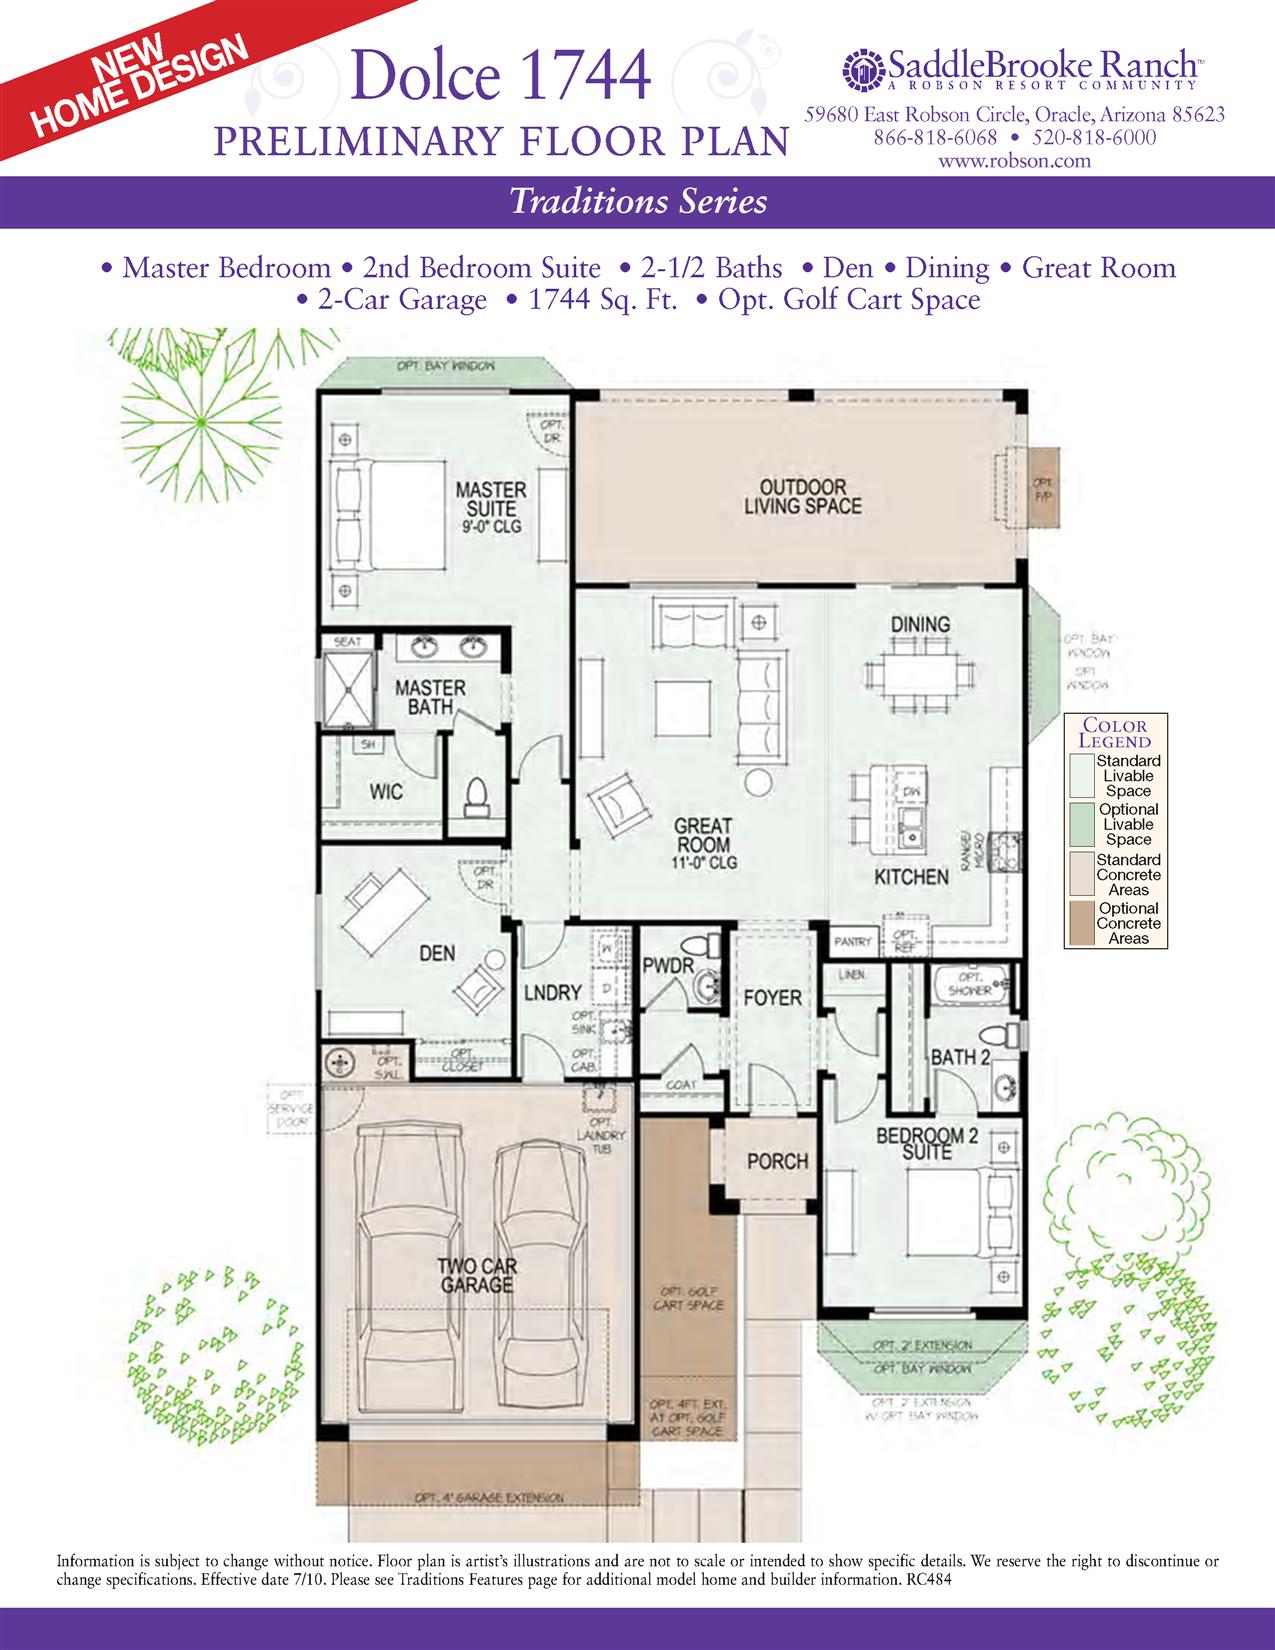 Dolce Floor Plan at SaddleBrooke Ranch by Robson